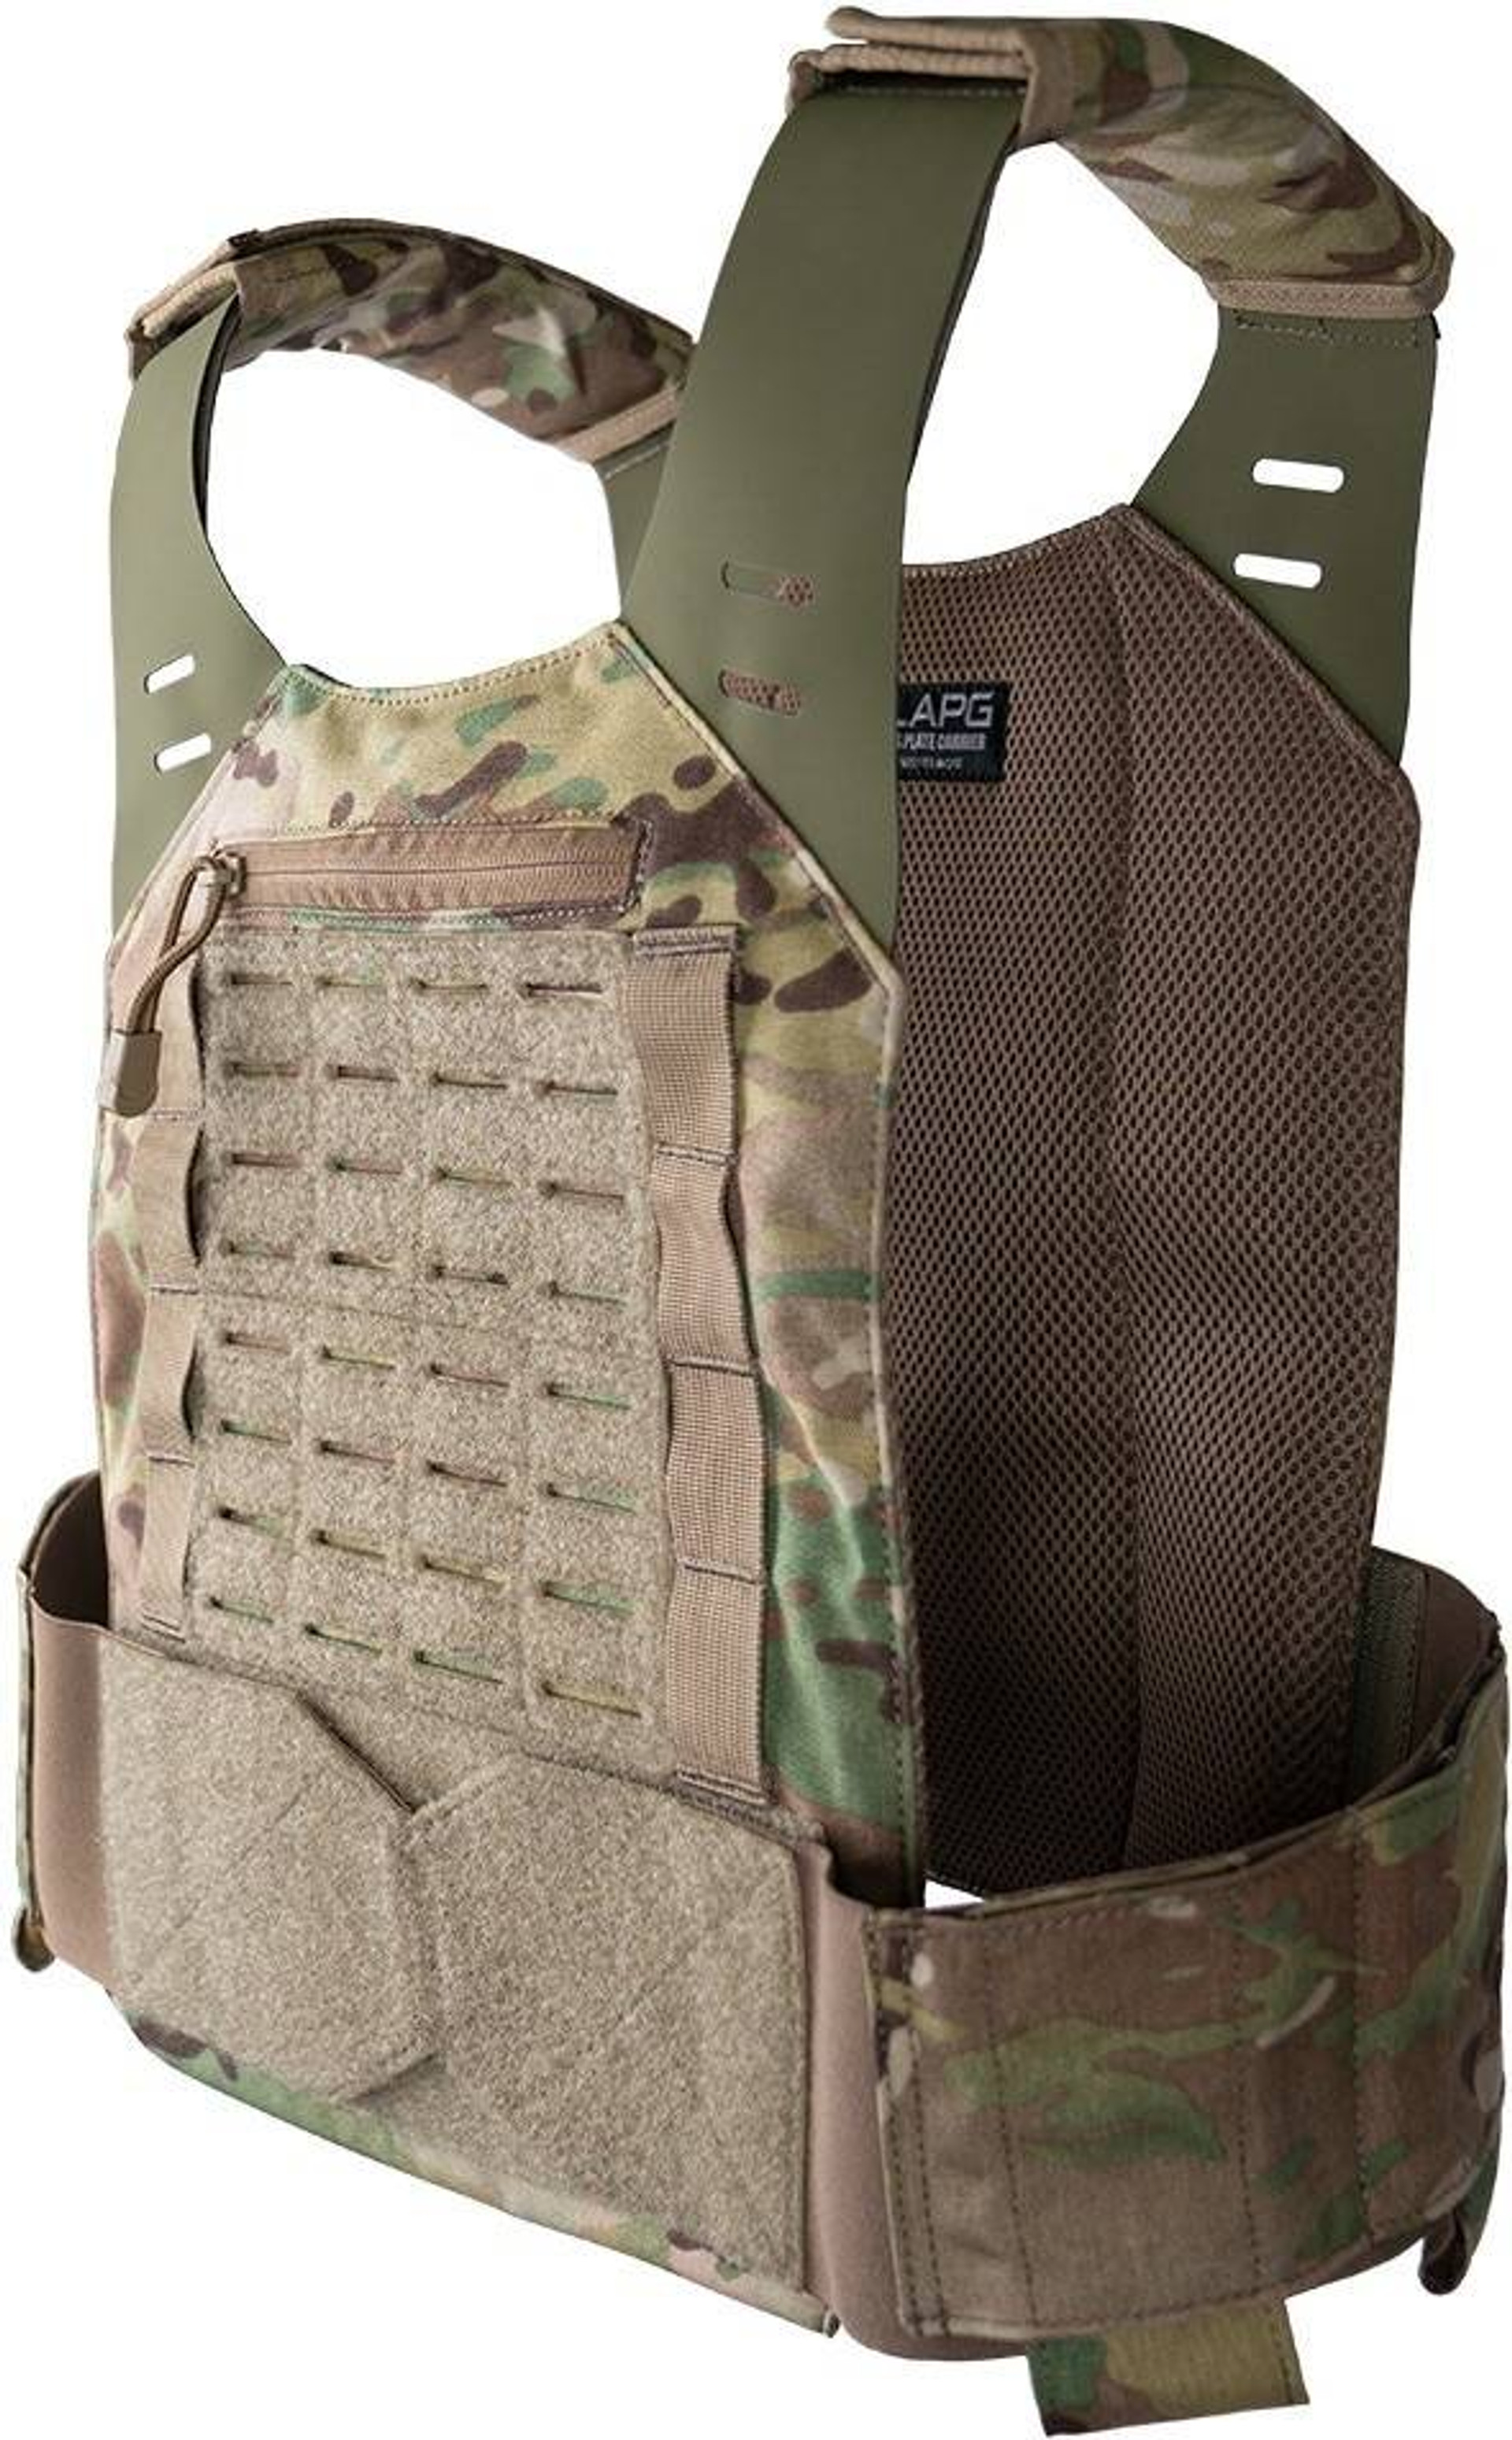 Concealable Plate Carrier | Lightweight & Breathable | LAPG